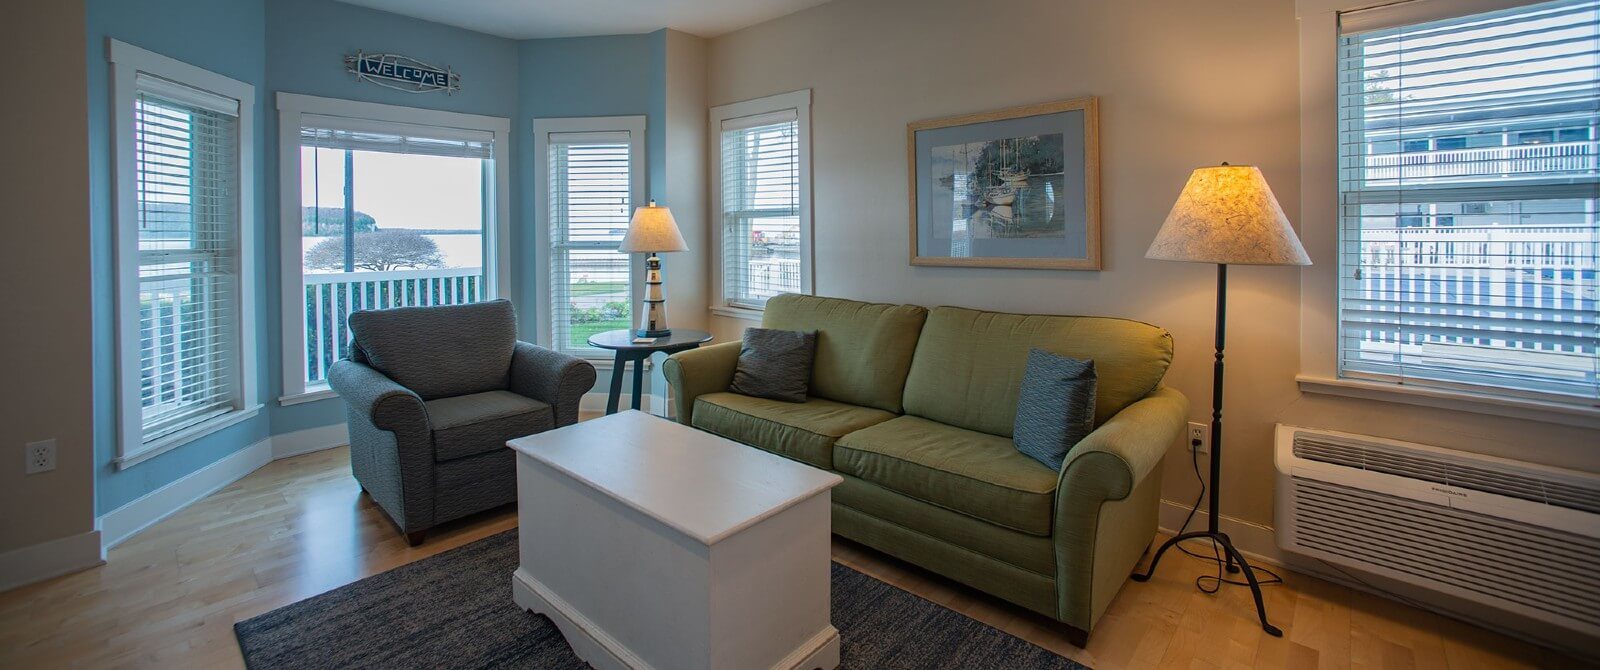 Living room area of a suite with two lamps, a green couch, chair, table and bay windows overlooking water